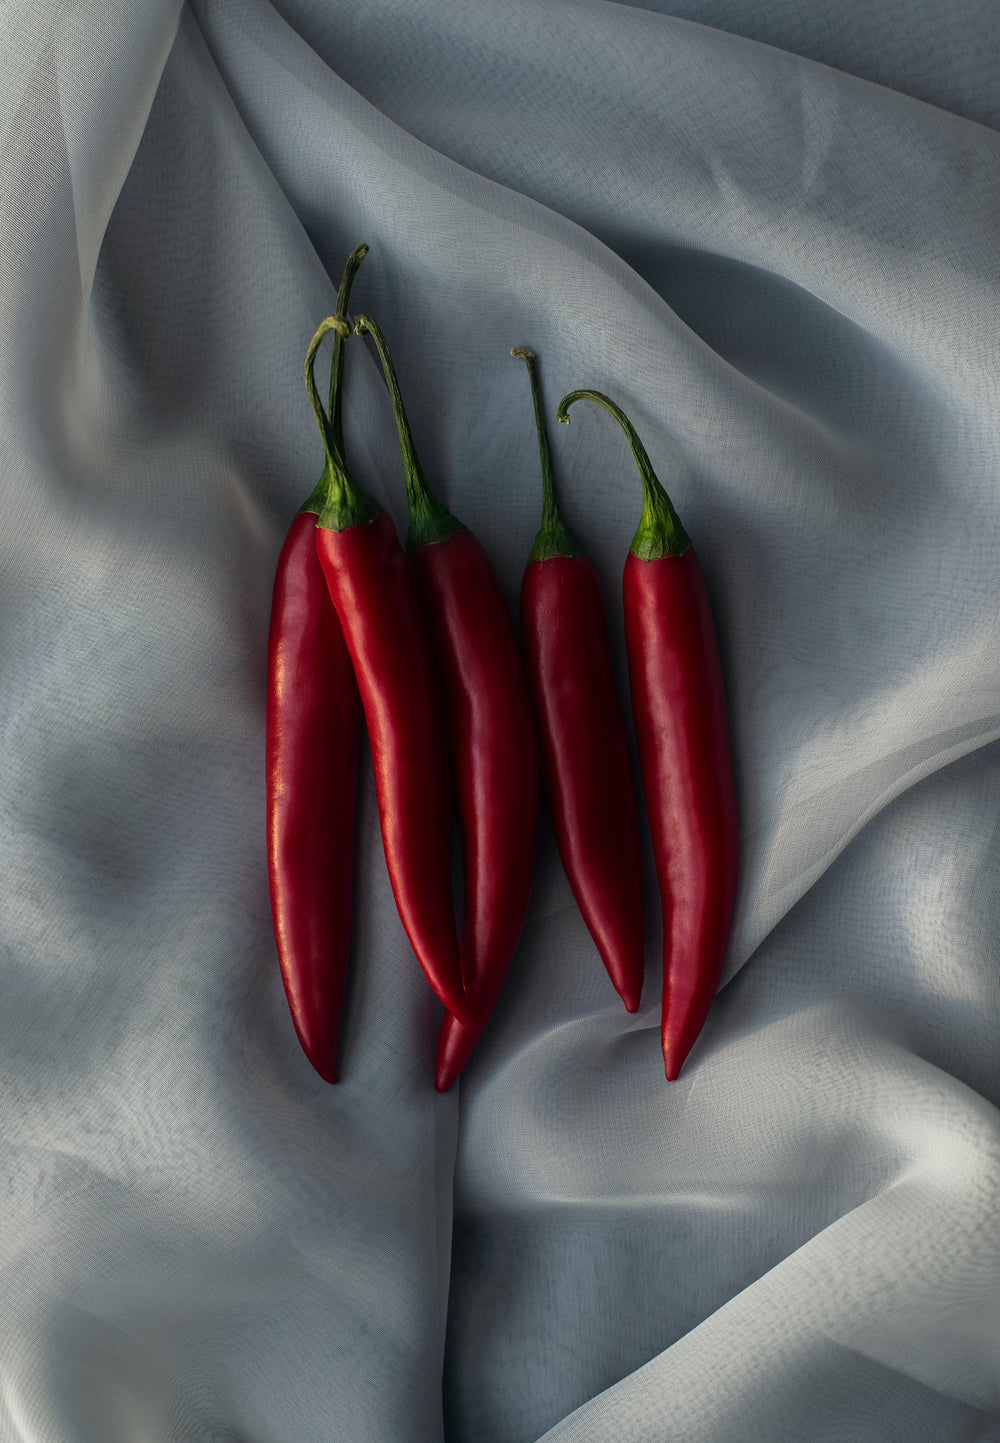 five hot peppers